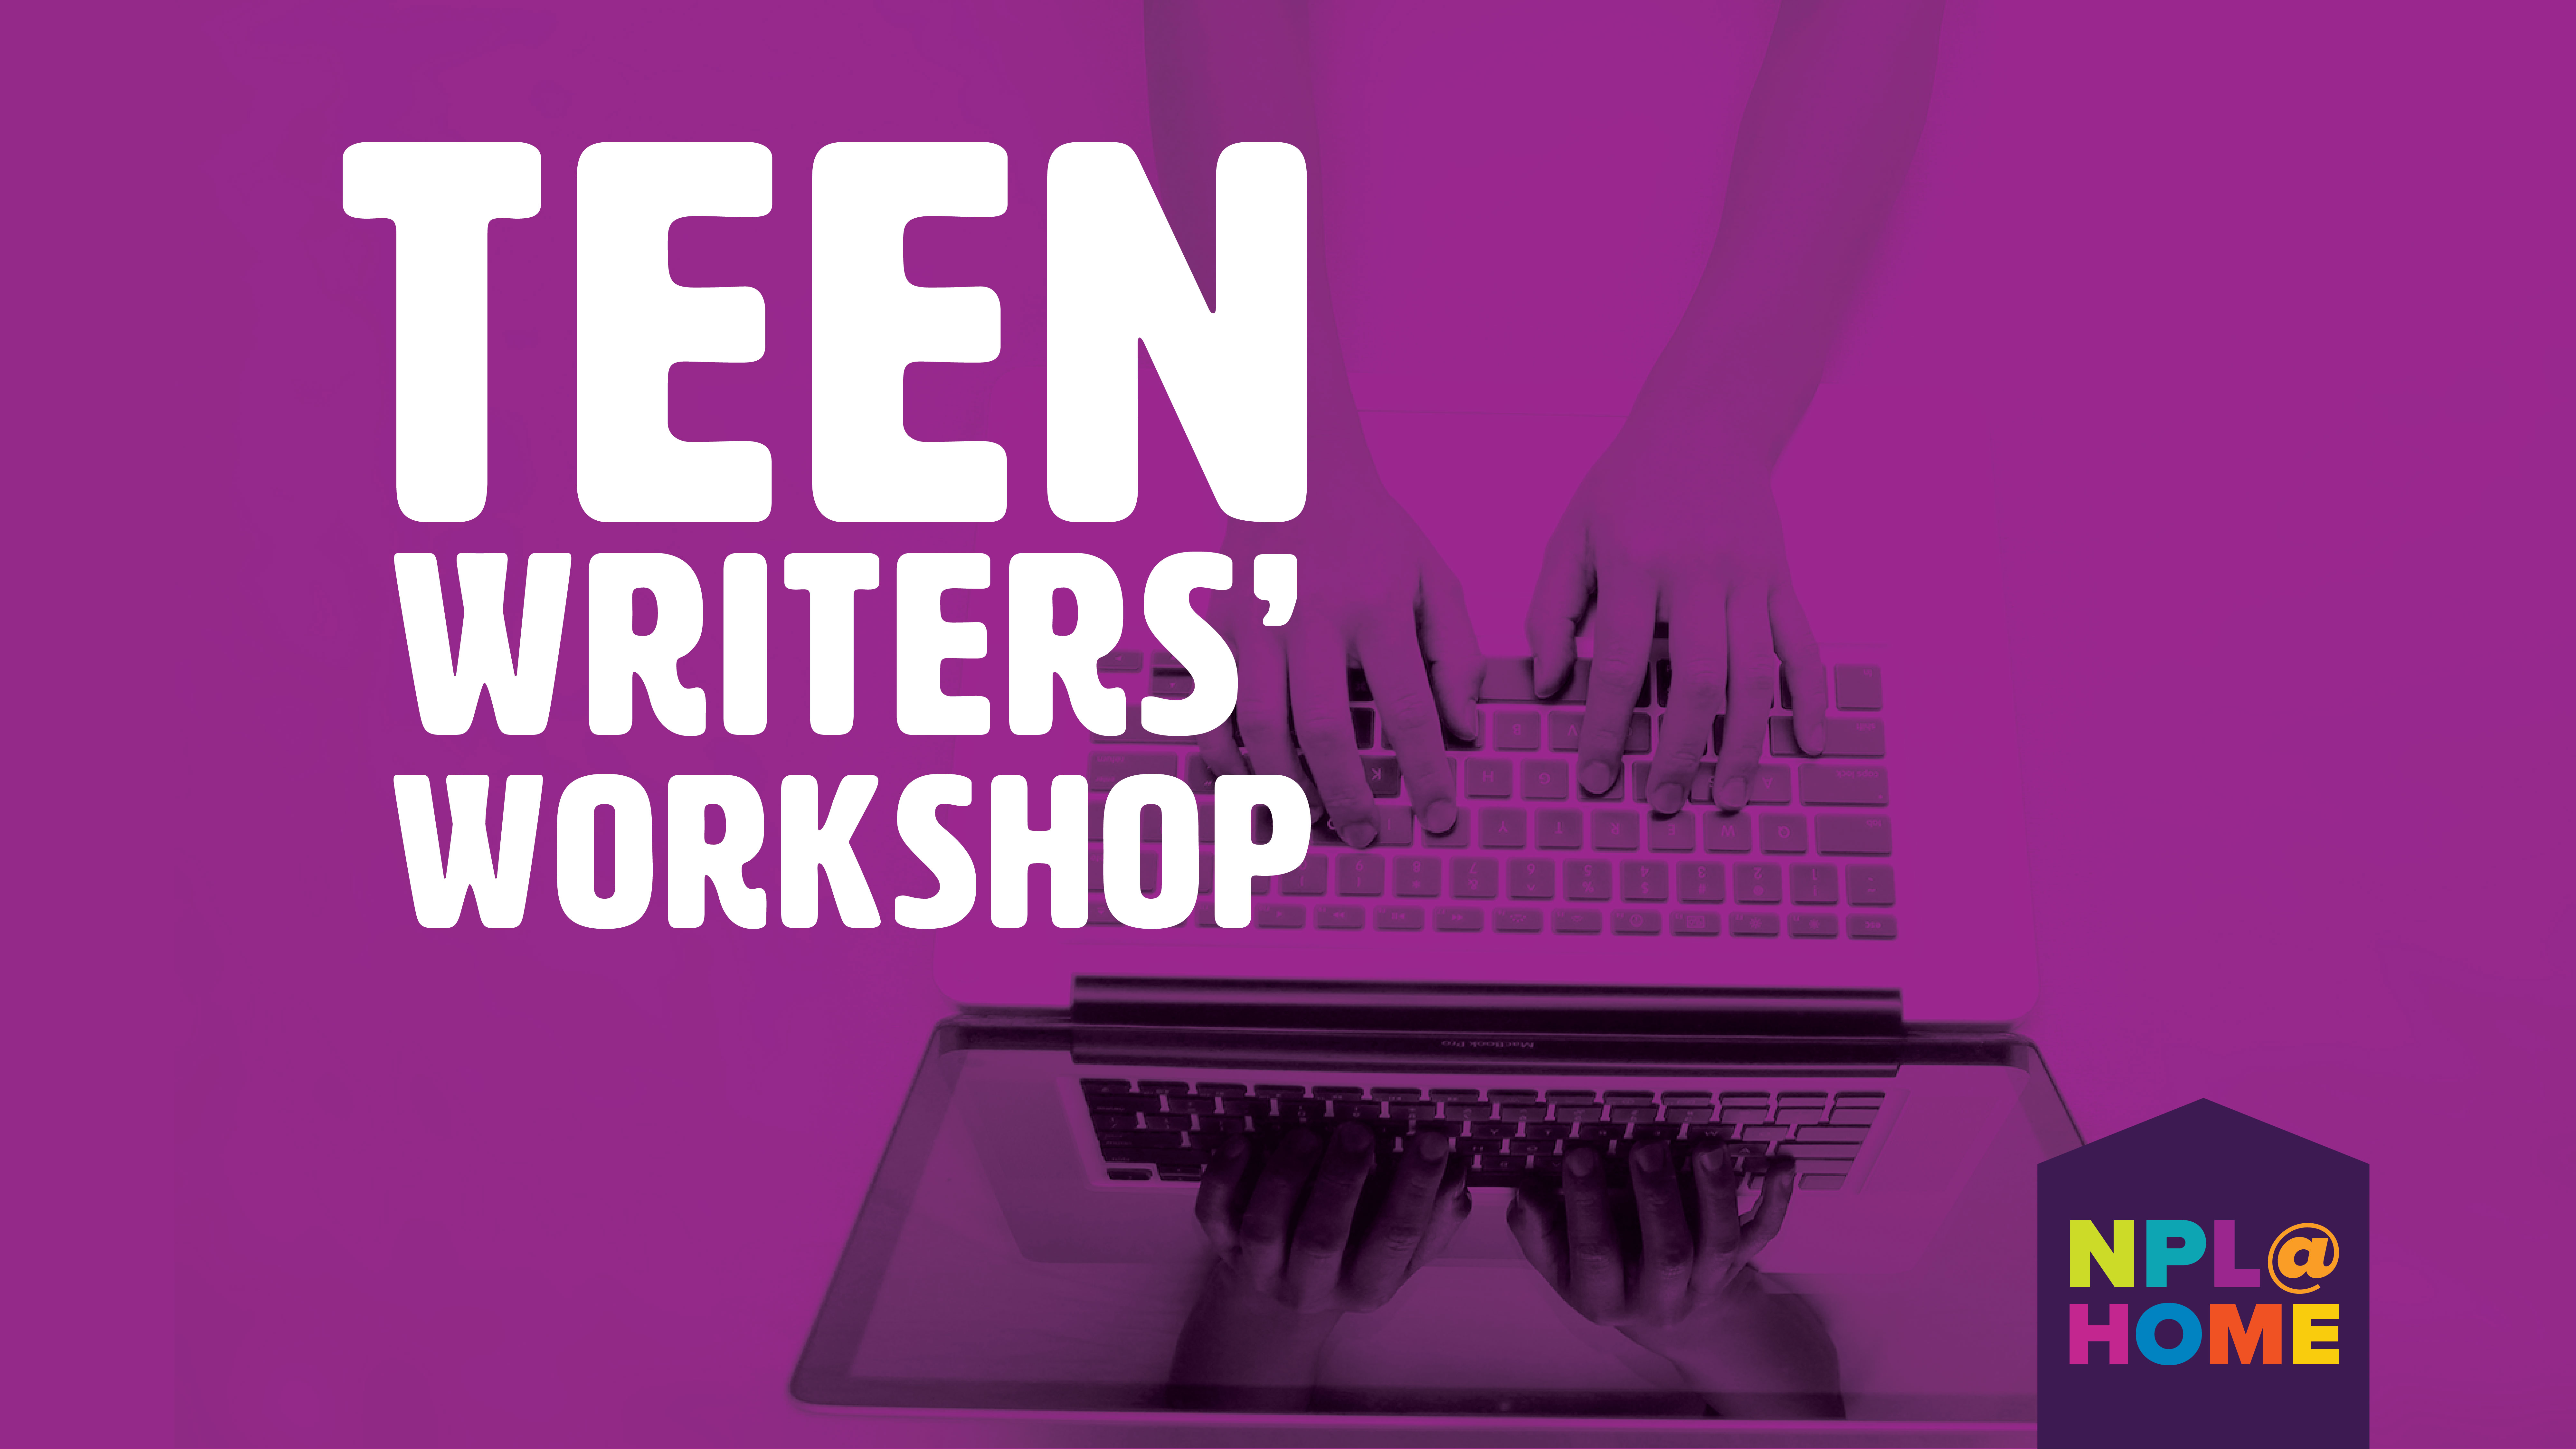 Image for Teen Writers' Workshop.